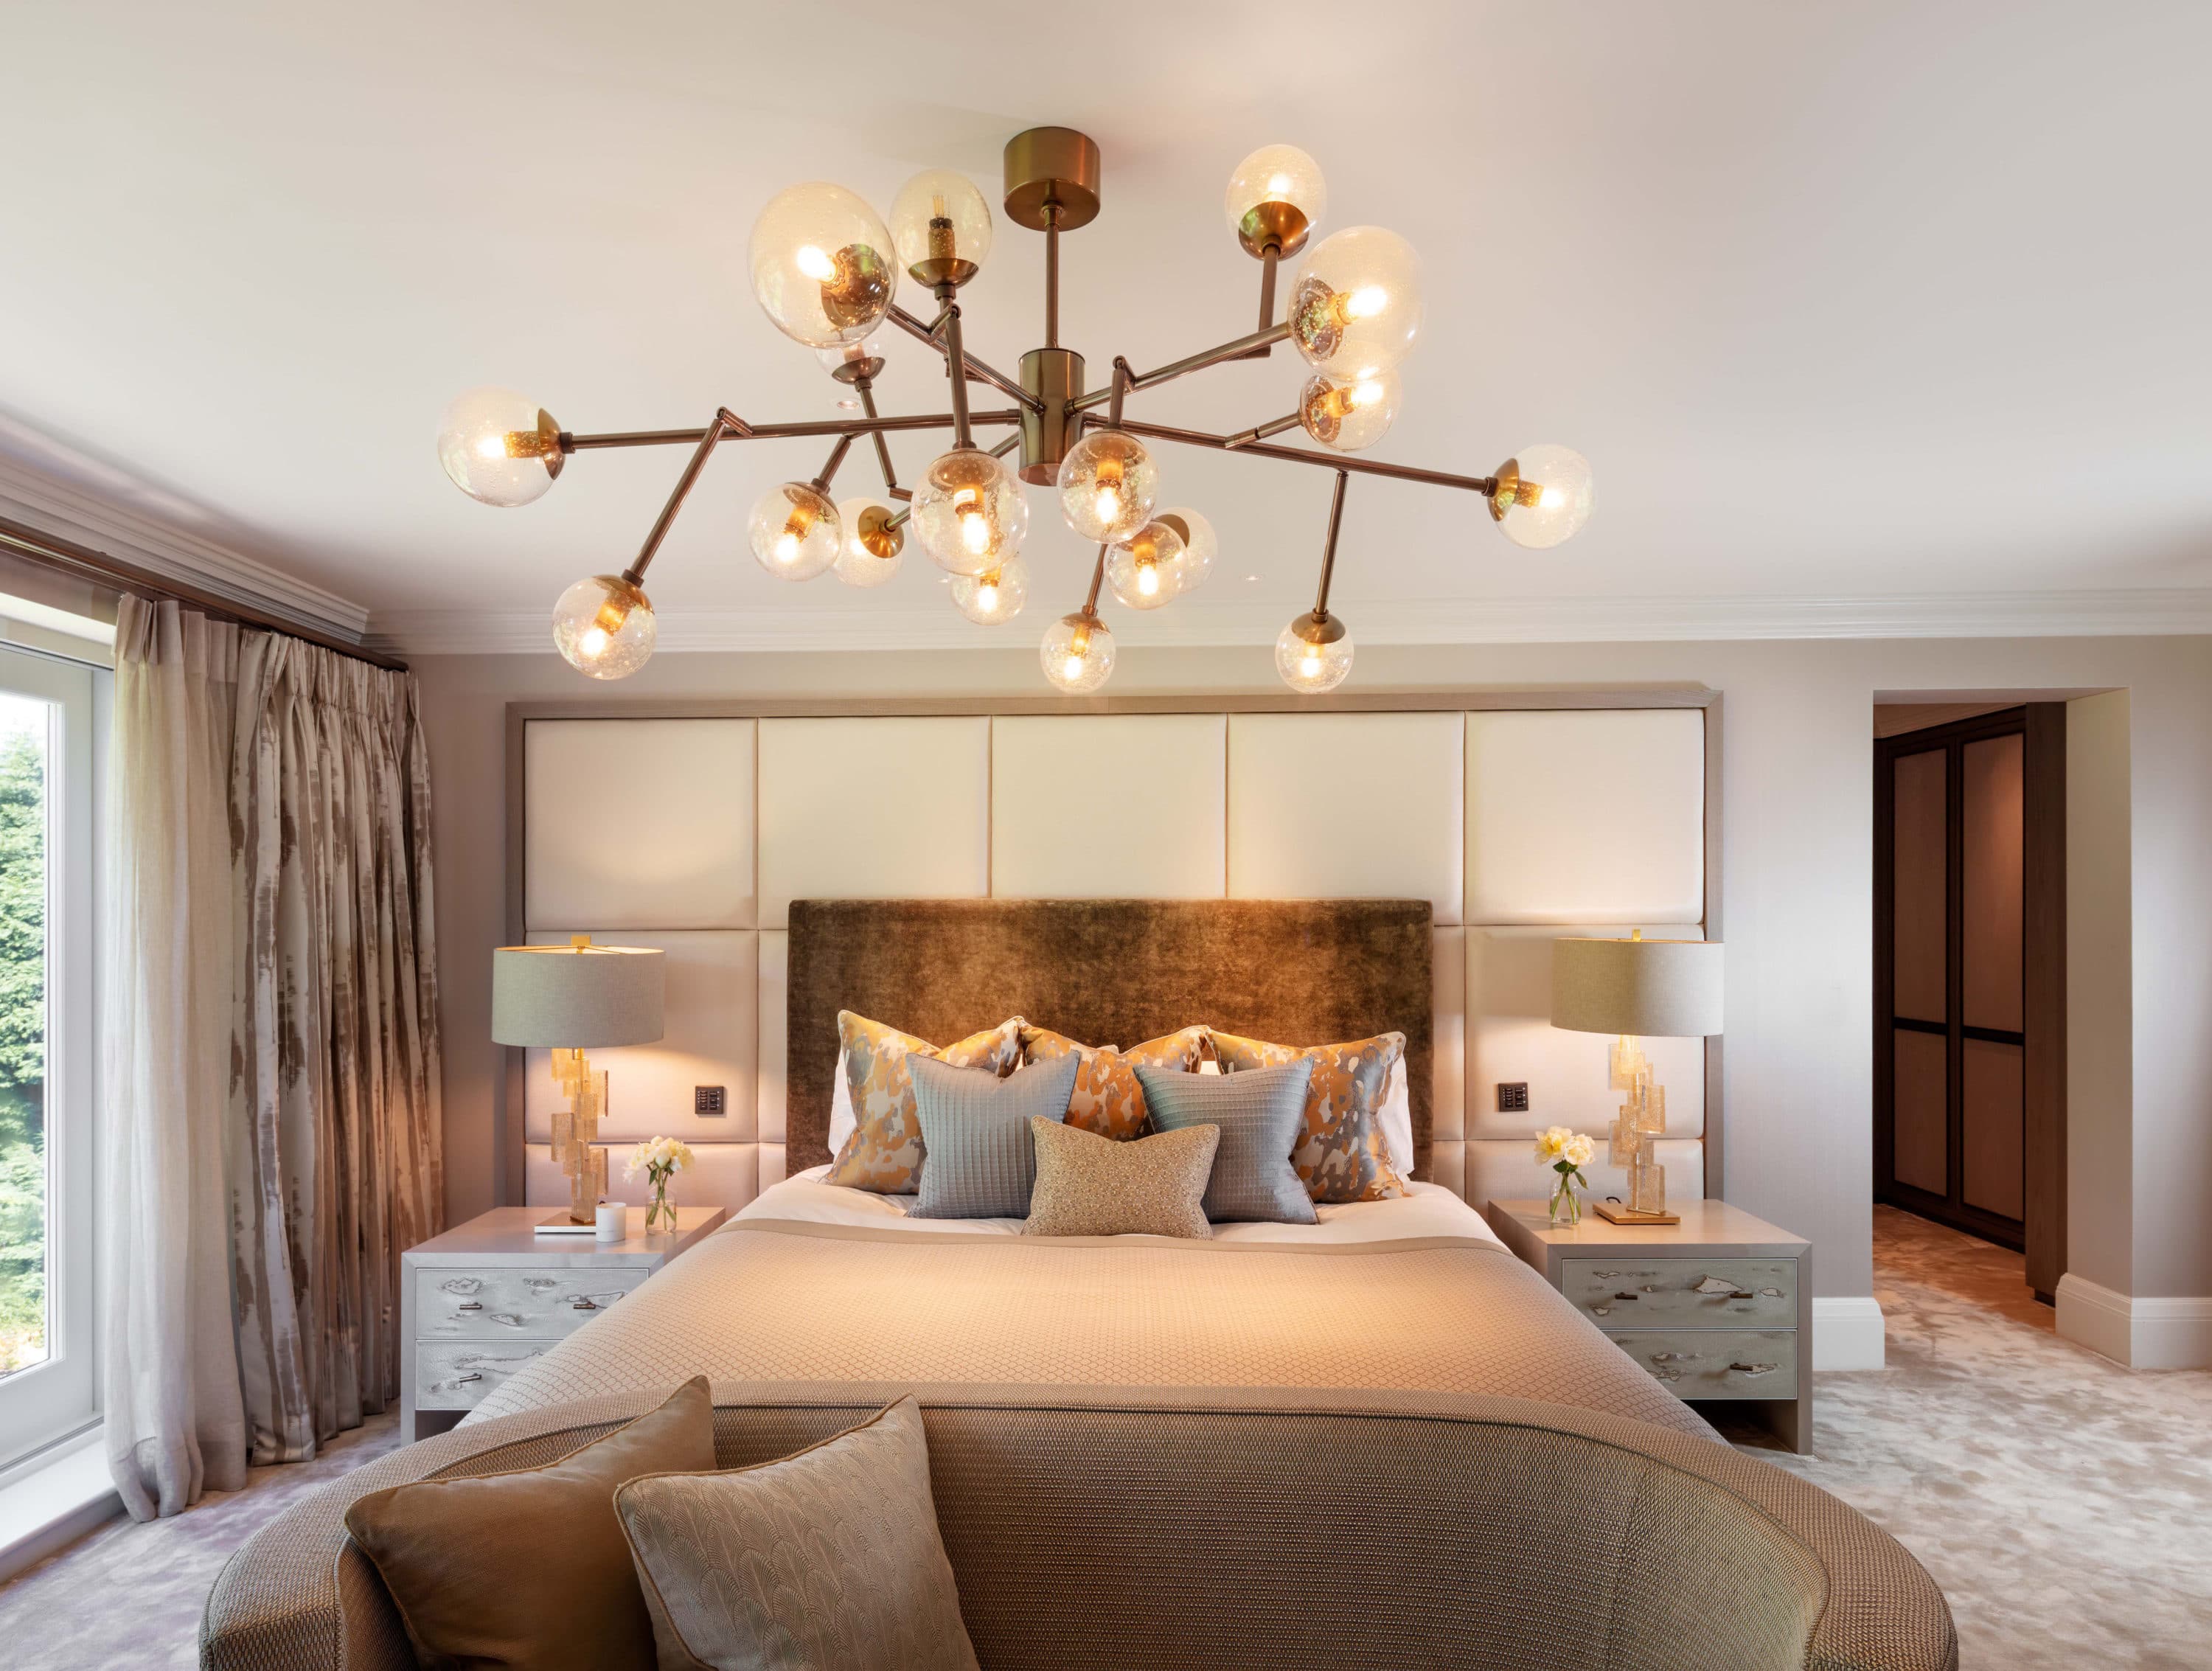 Chandelier above a king size bed